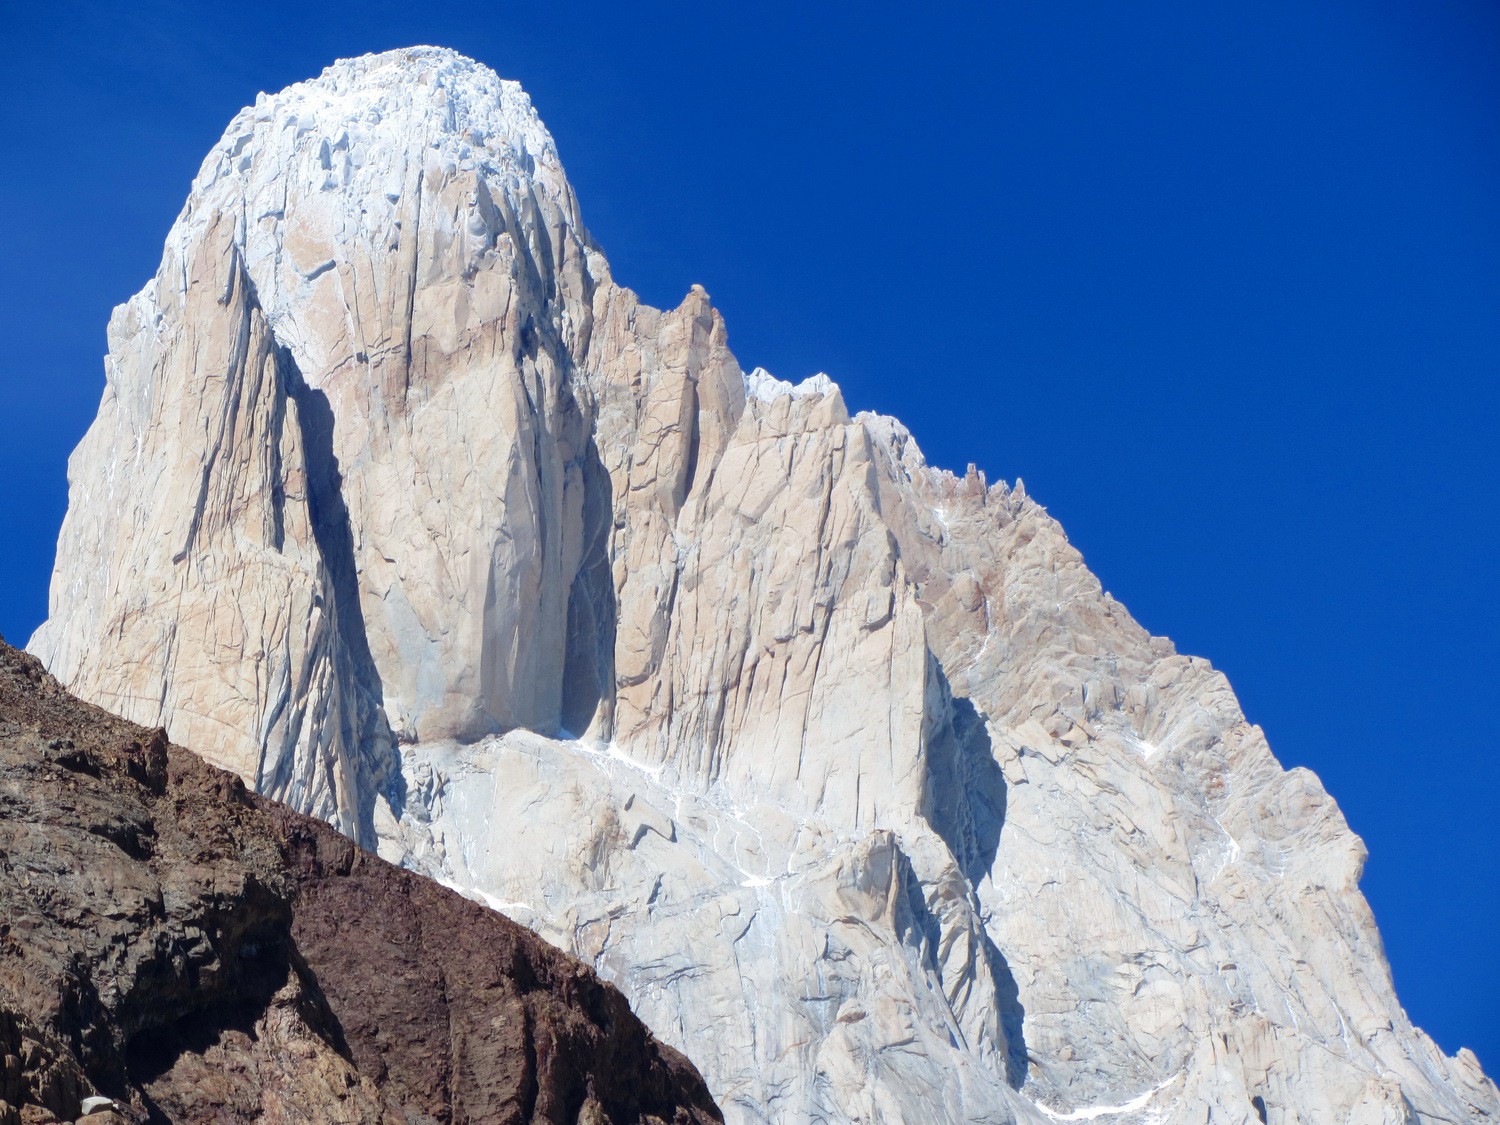 North face of Cerro Fitz Roy with 3405 meters the highest point of southern Patagonia